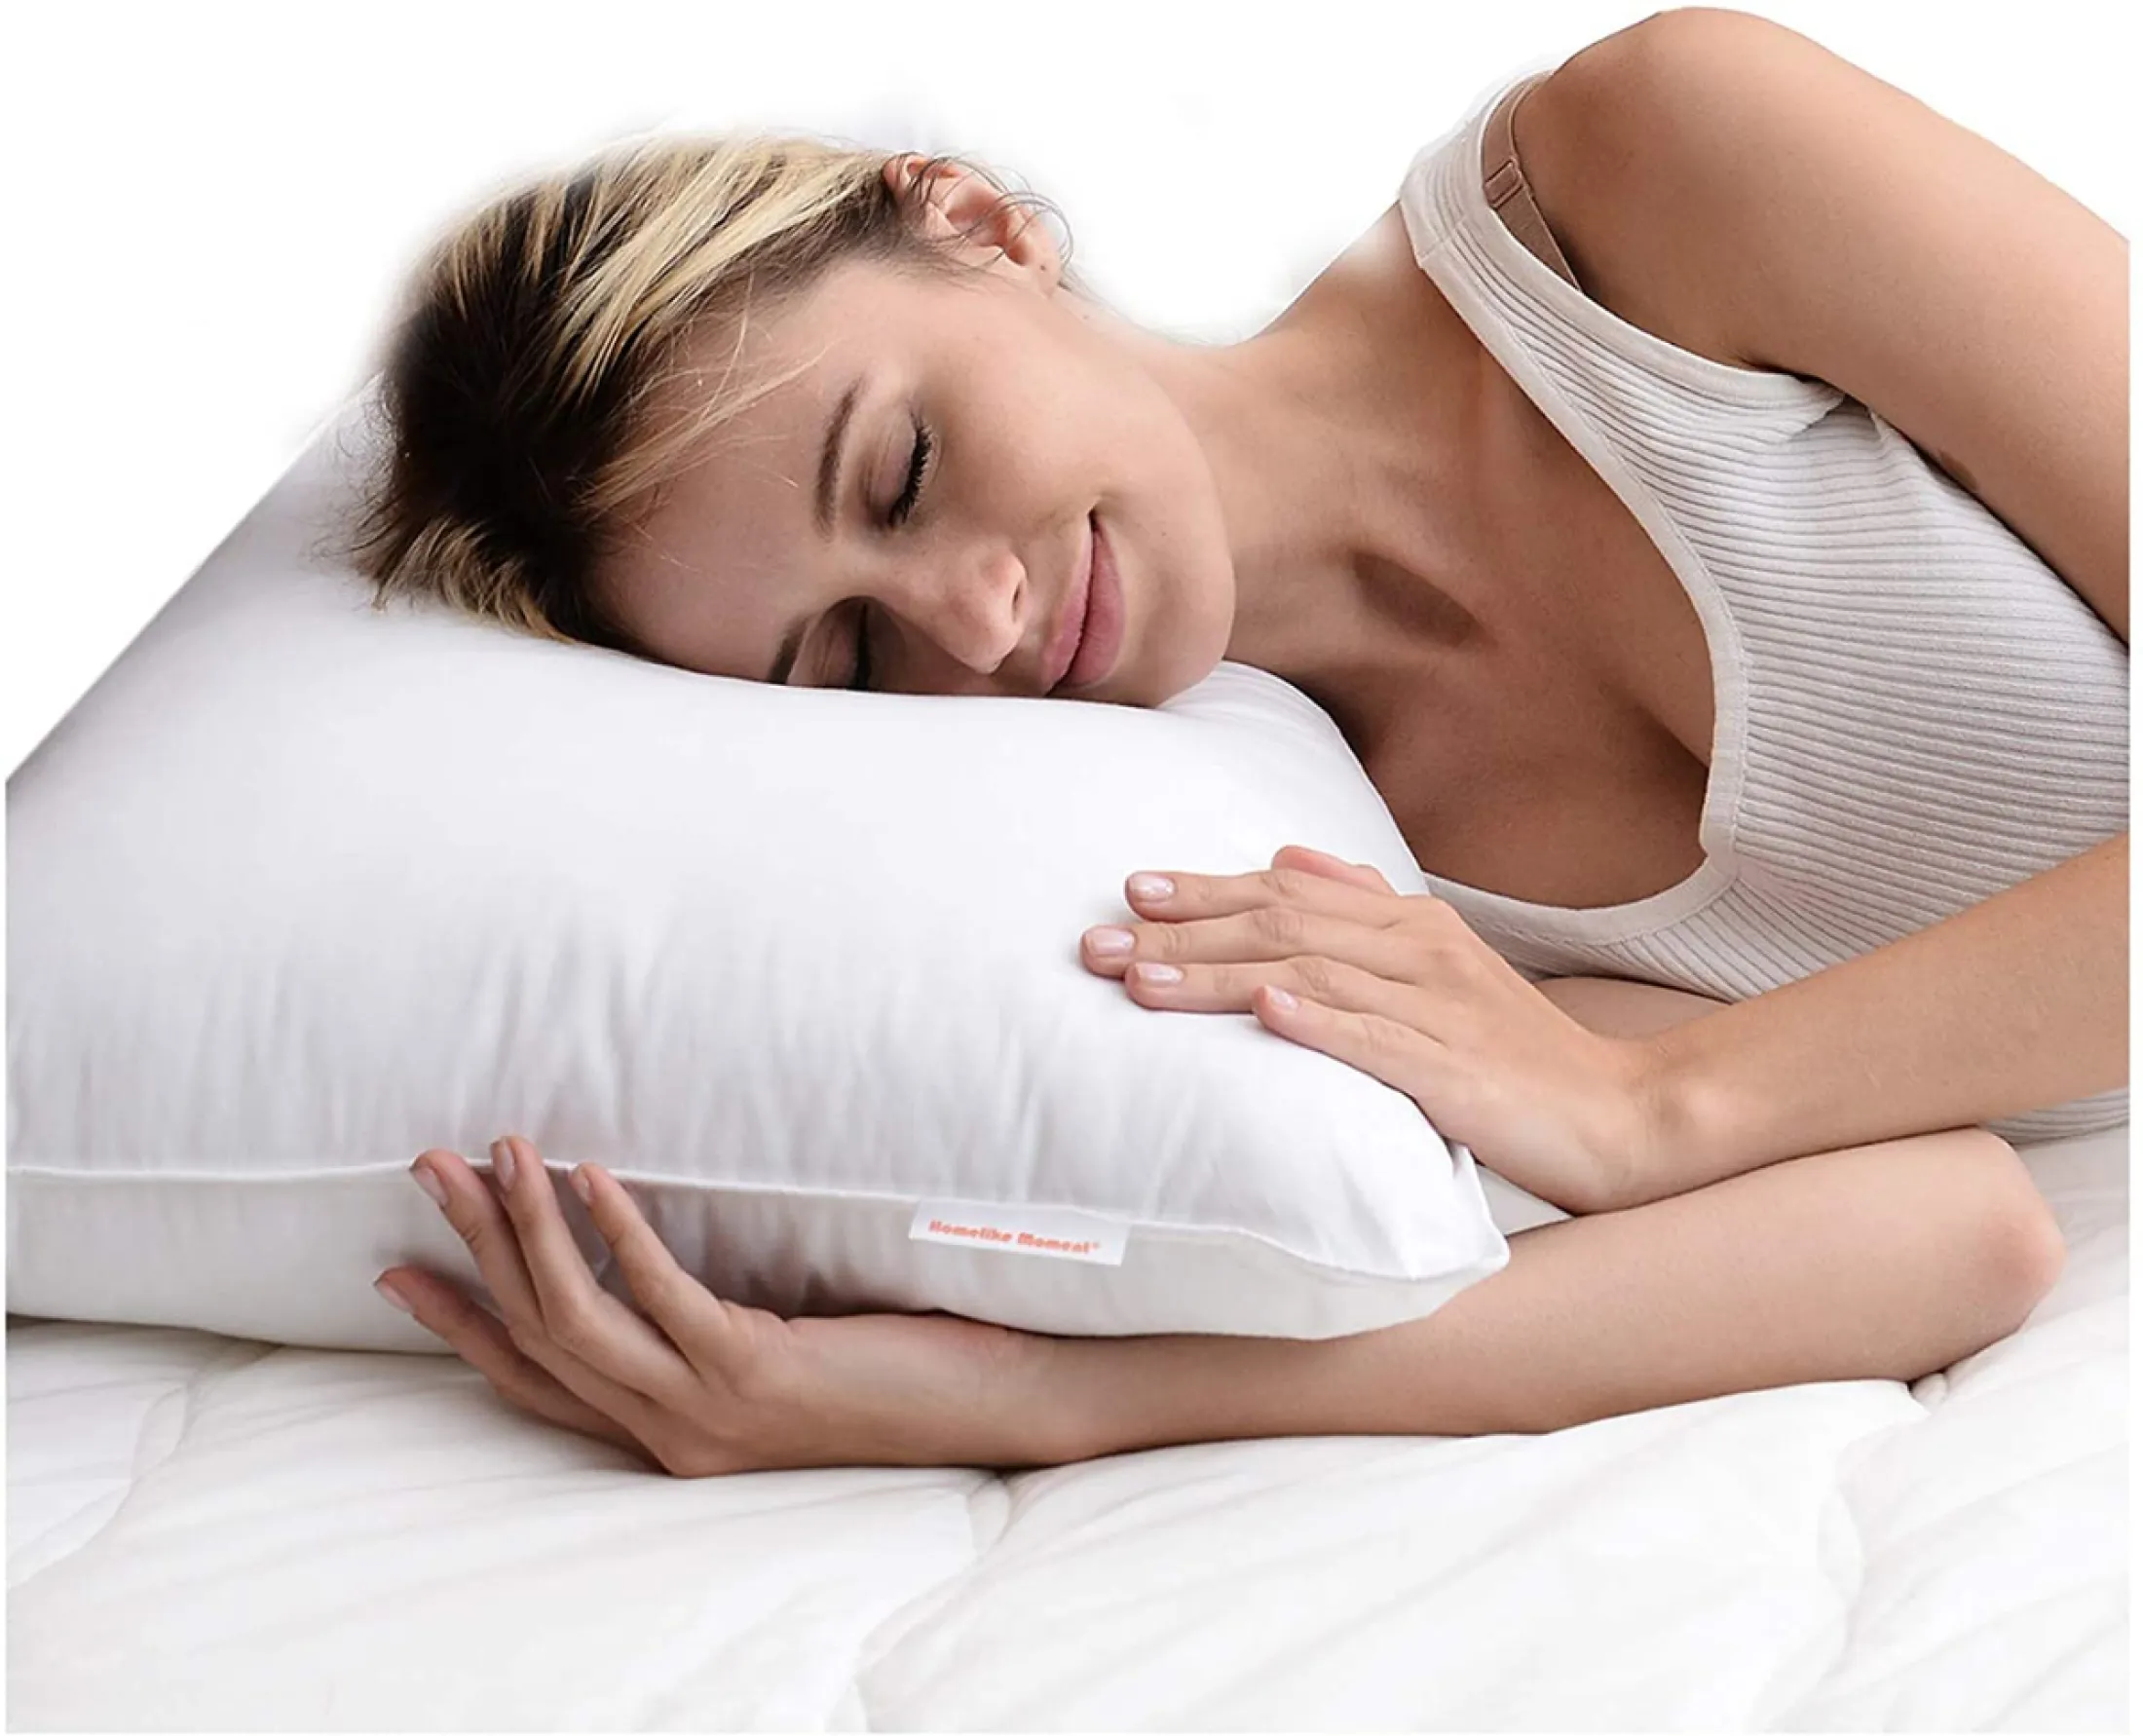 Moment King Bed Pillows For Sleeping, Down Bed Pillows King